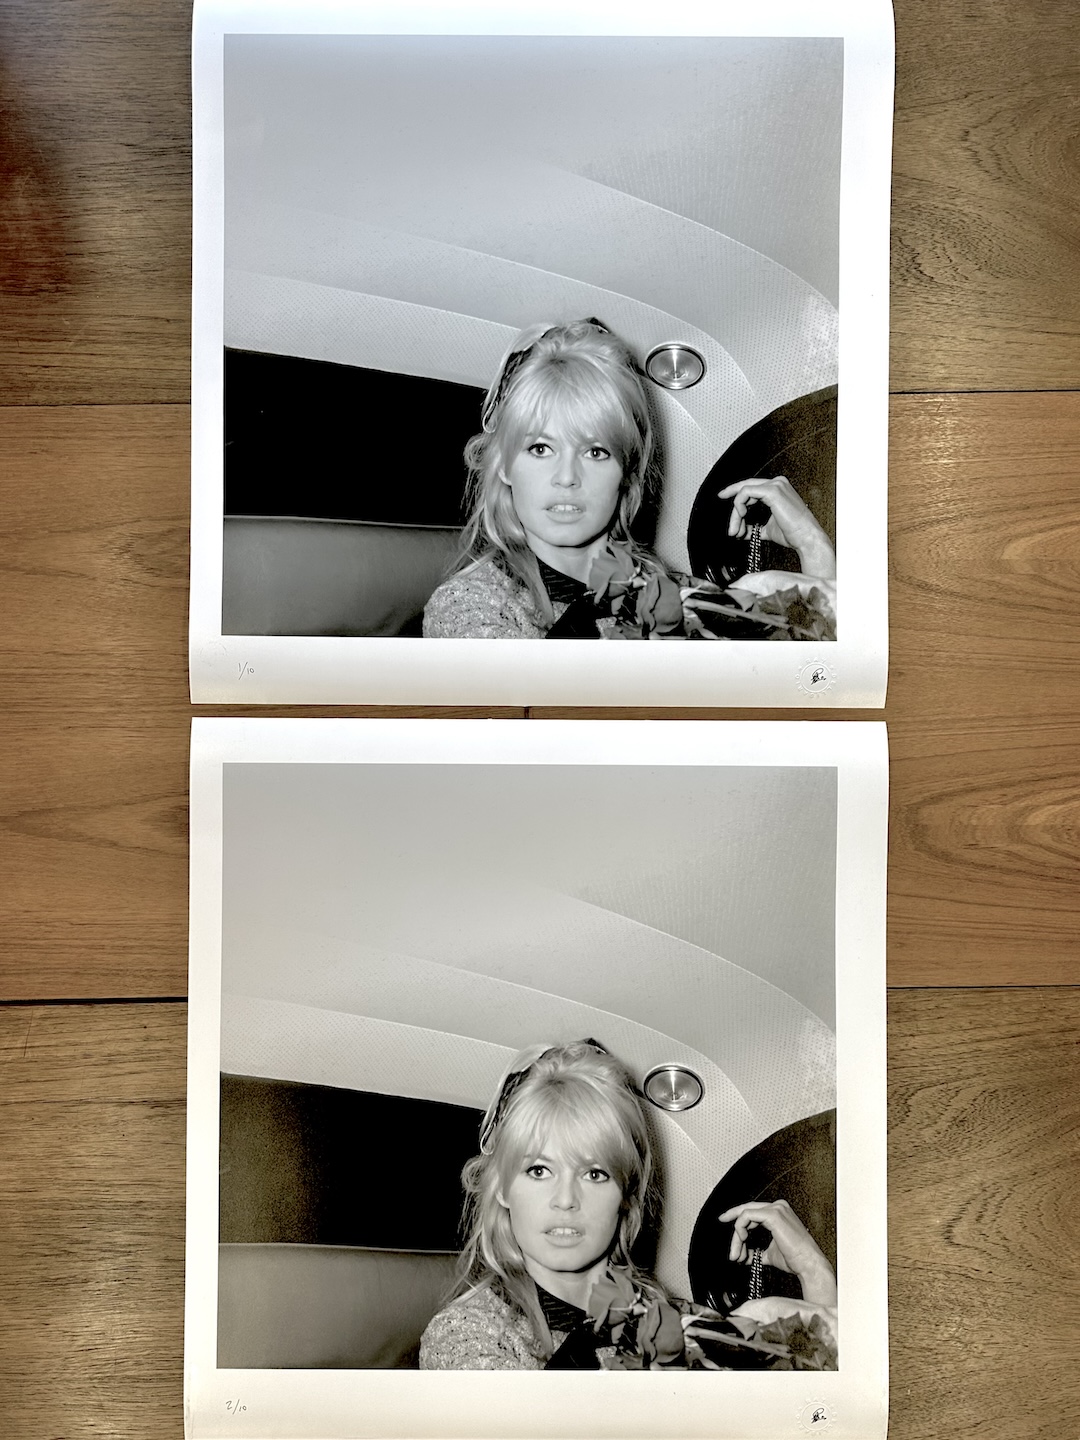 Ray Bellisario, 'Bridget Bardot', numbers 1 and 2 from an edition of 10.